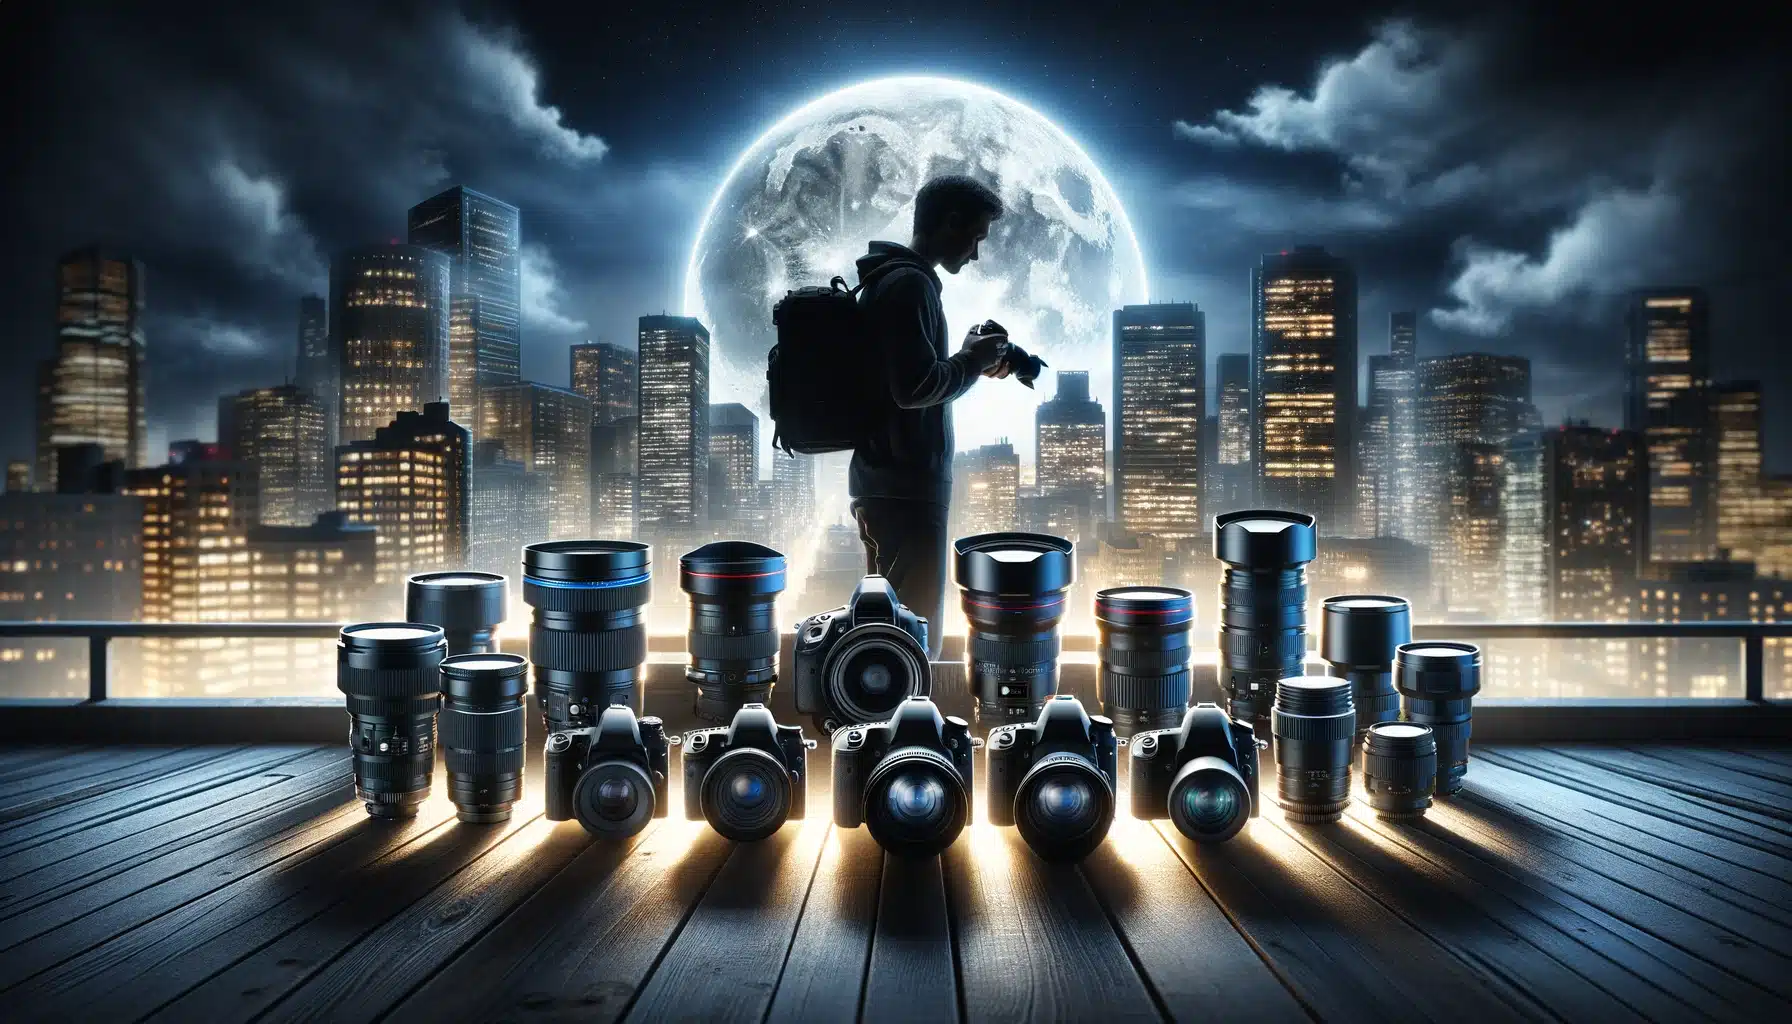 Photographer capturing illuminated buildings at night, surrounded by various professional Camcorders and lenses, showcasing equipment for night photography.